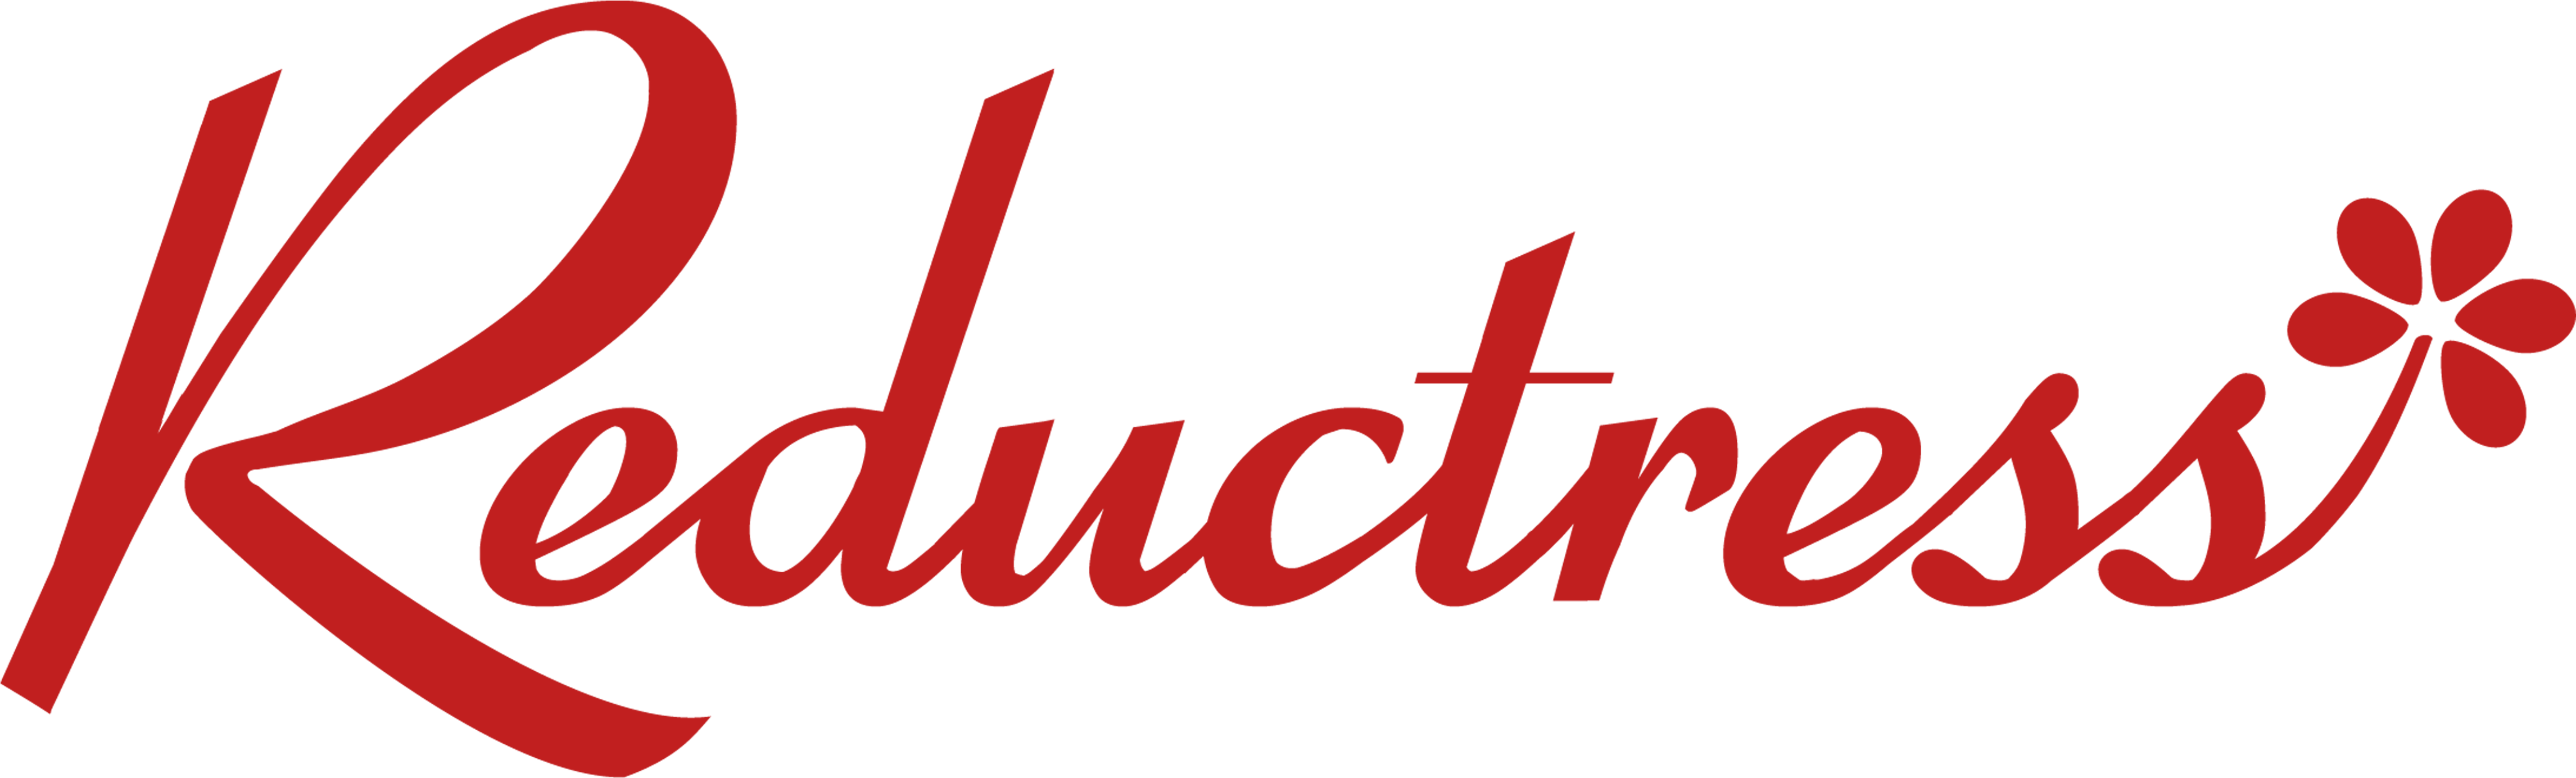 Reductress Satire Reductress Logo Png Clipart Large Size Png Image Pikpng